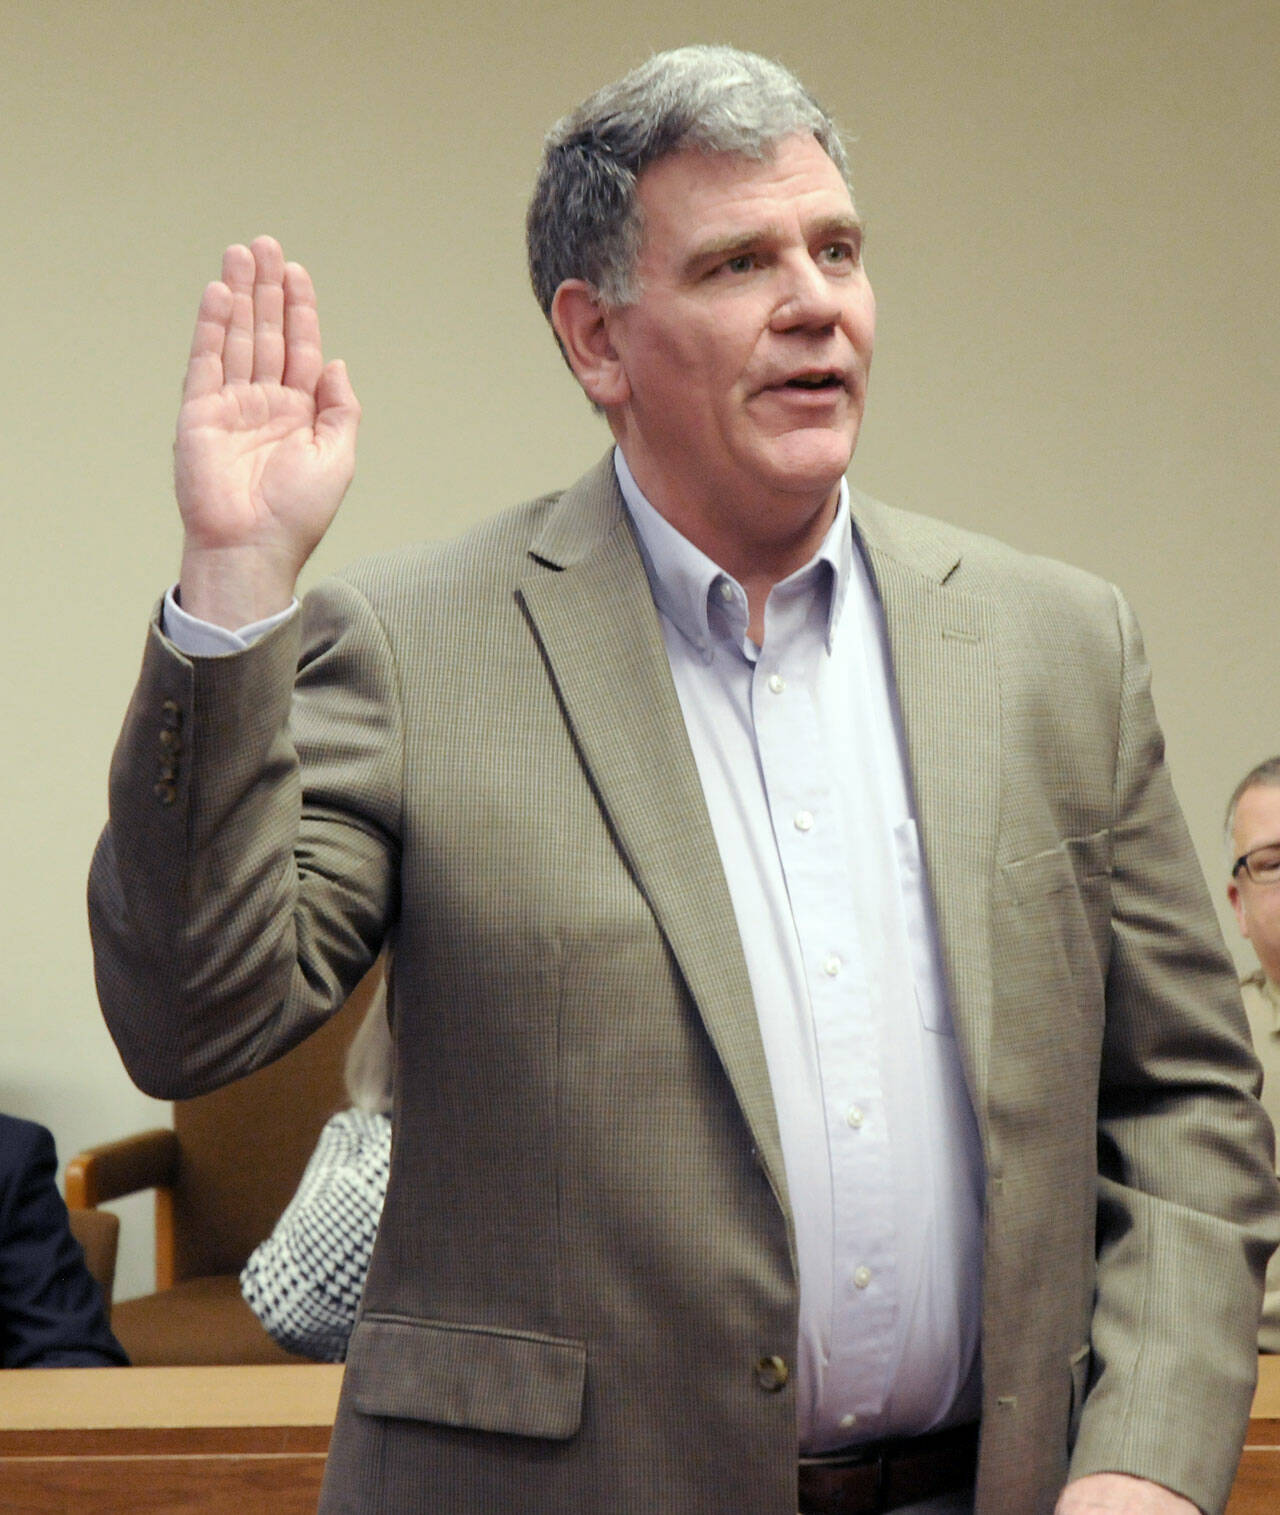 Bruce Emery takes the oath of office for the position of Clallam County director of community development on Wednesday. (Keith Thorpe/Peninsula Daily News)